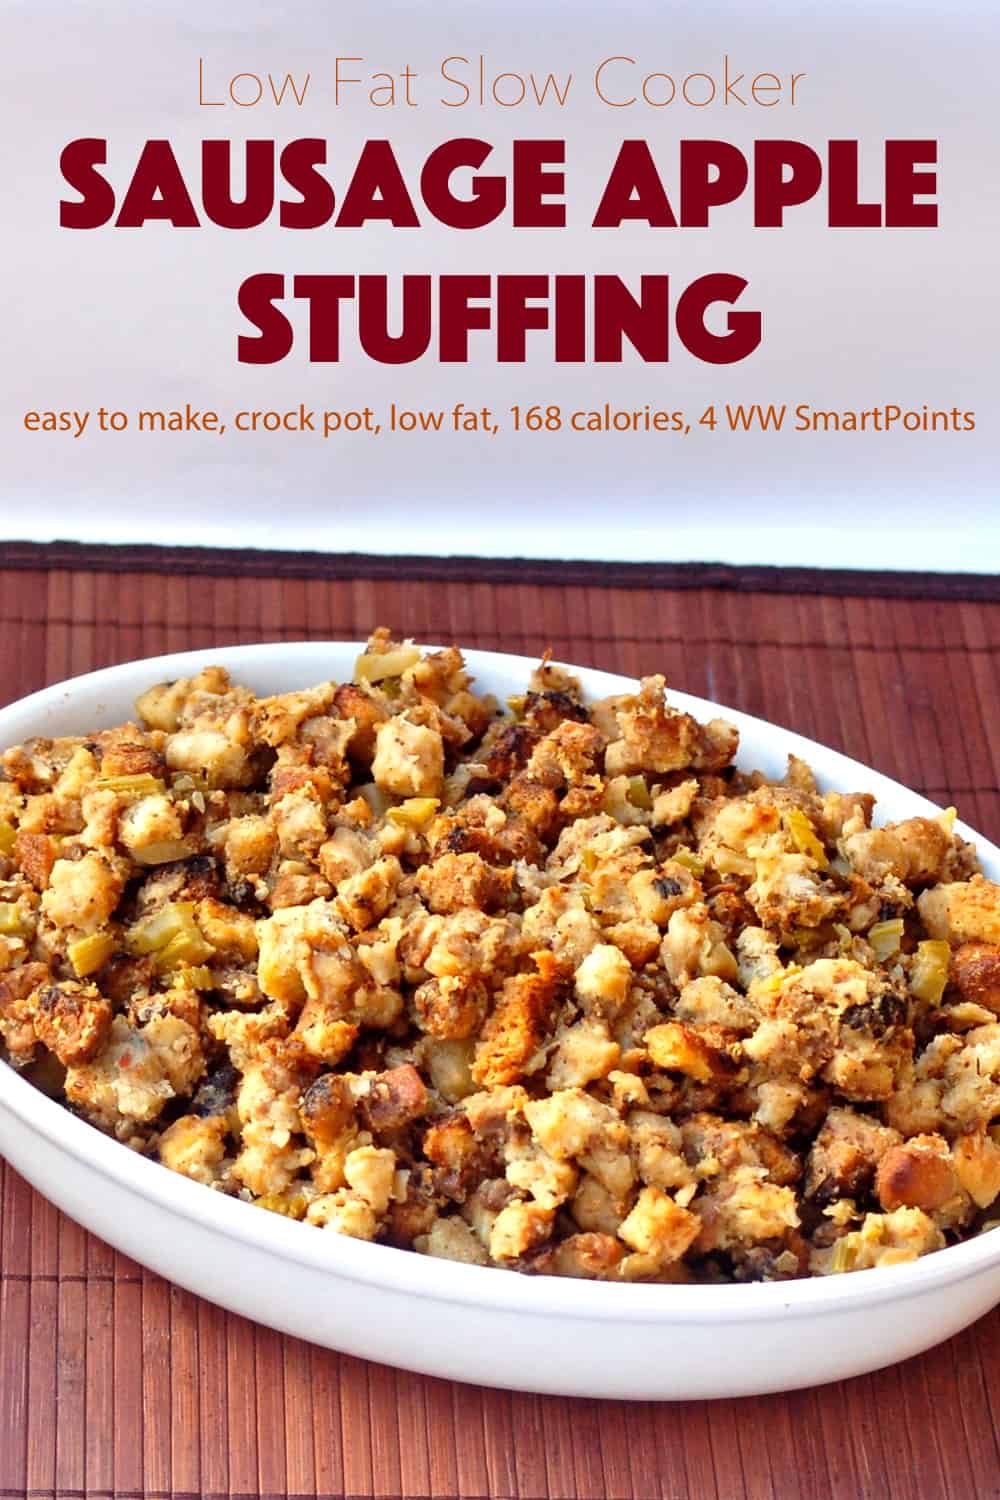 Slow Cooker Sausage Apple Stuffing in white serving dish on wooden mat.